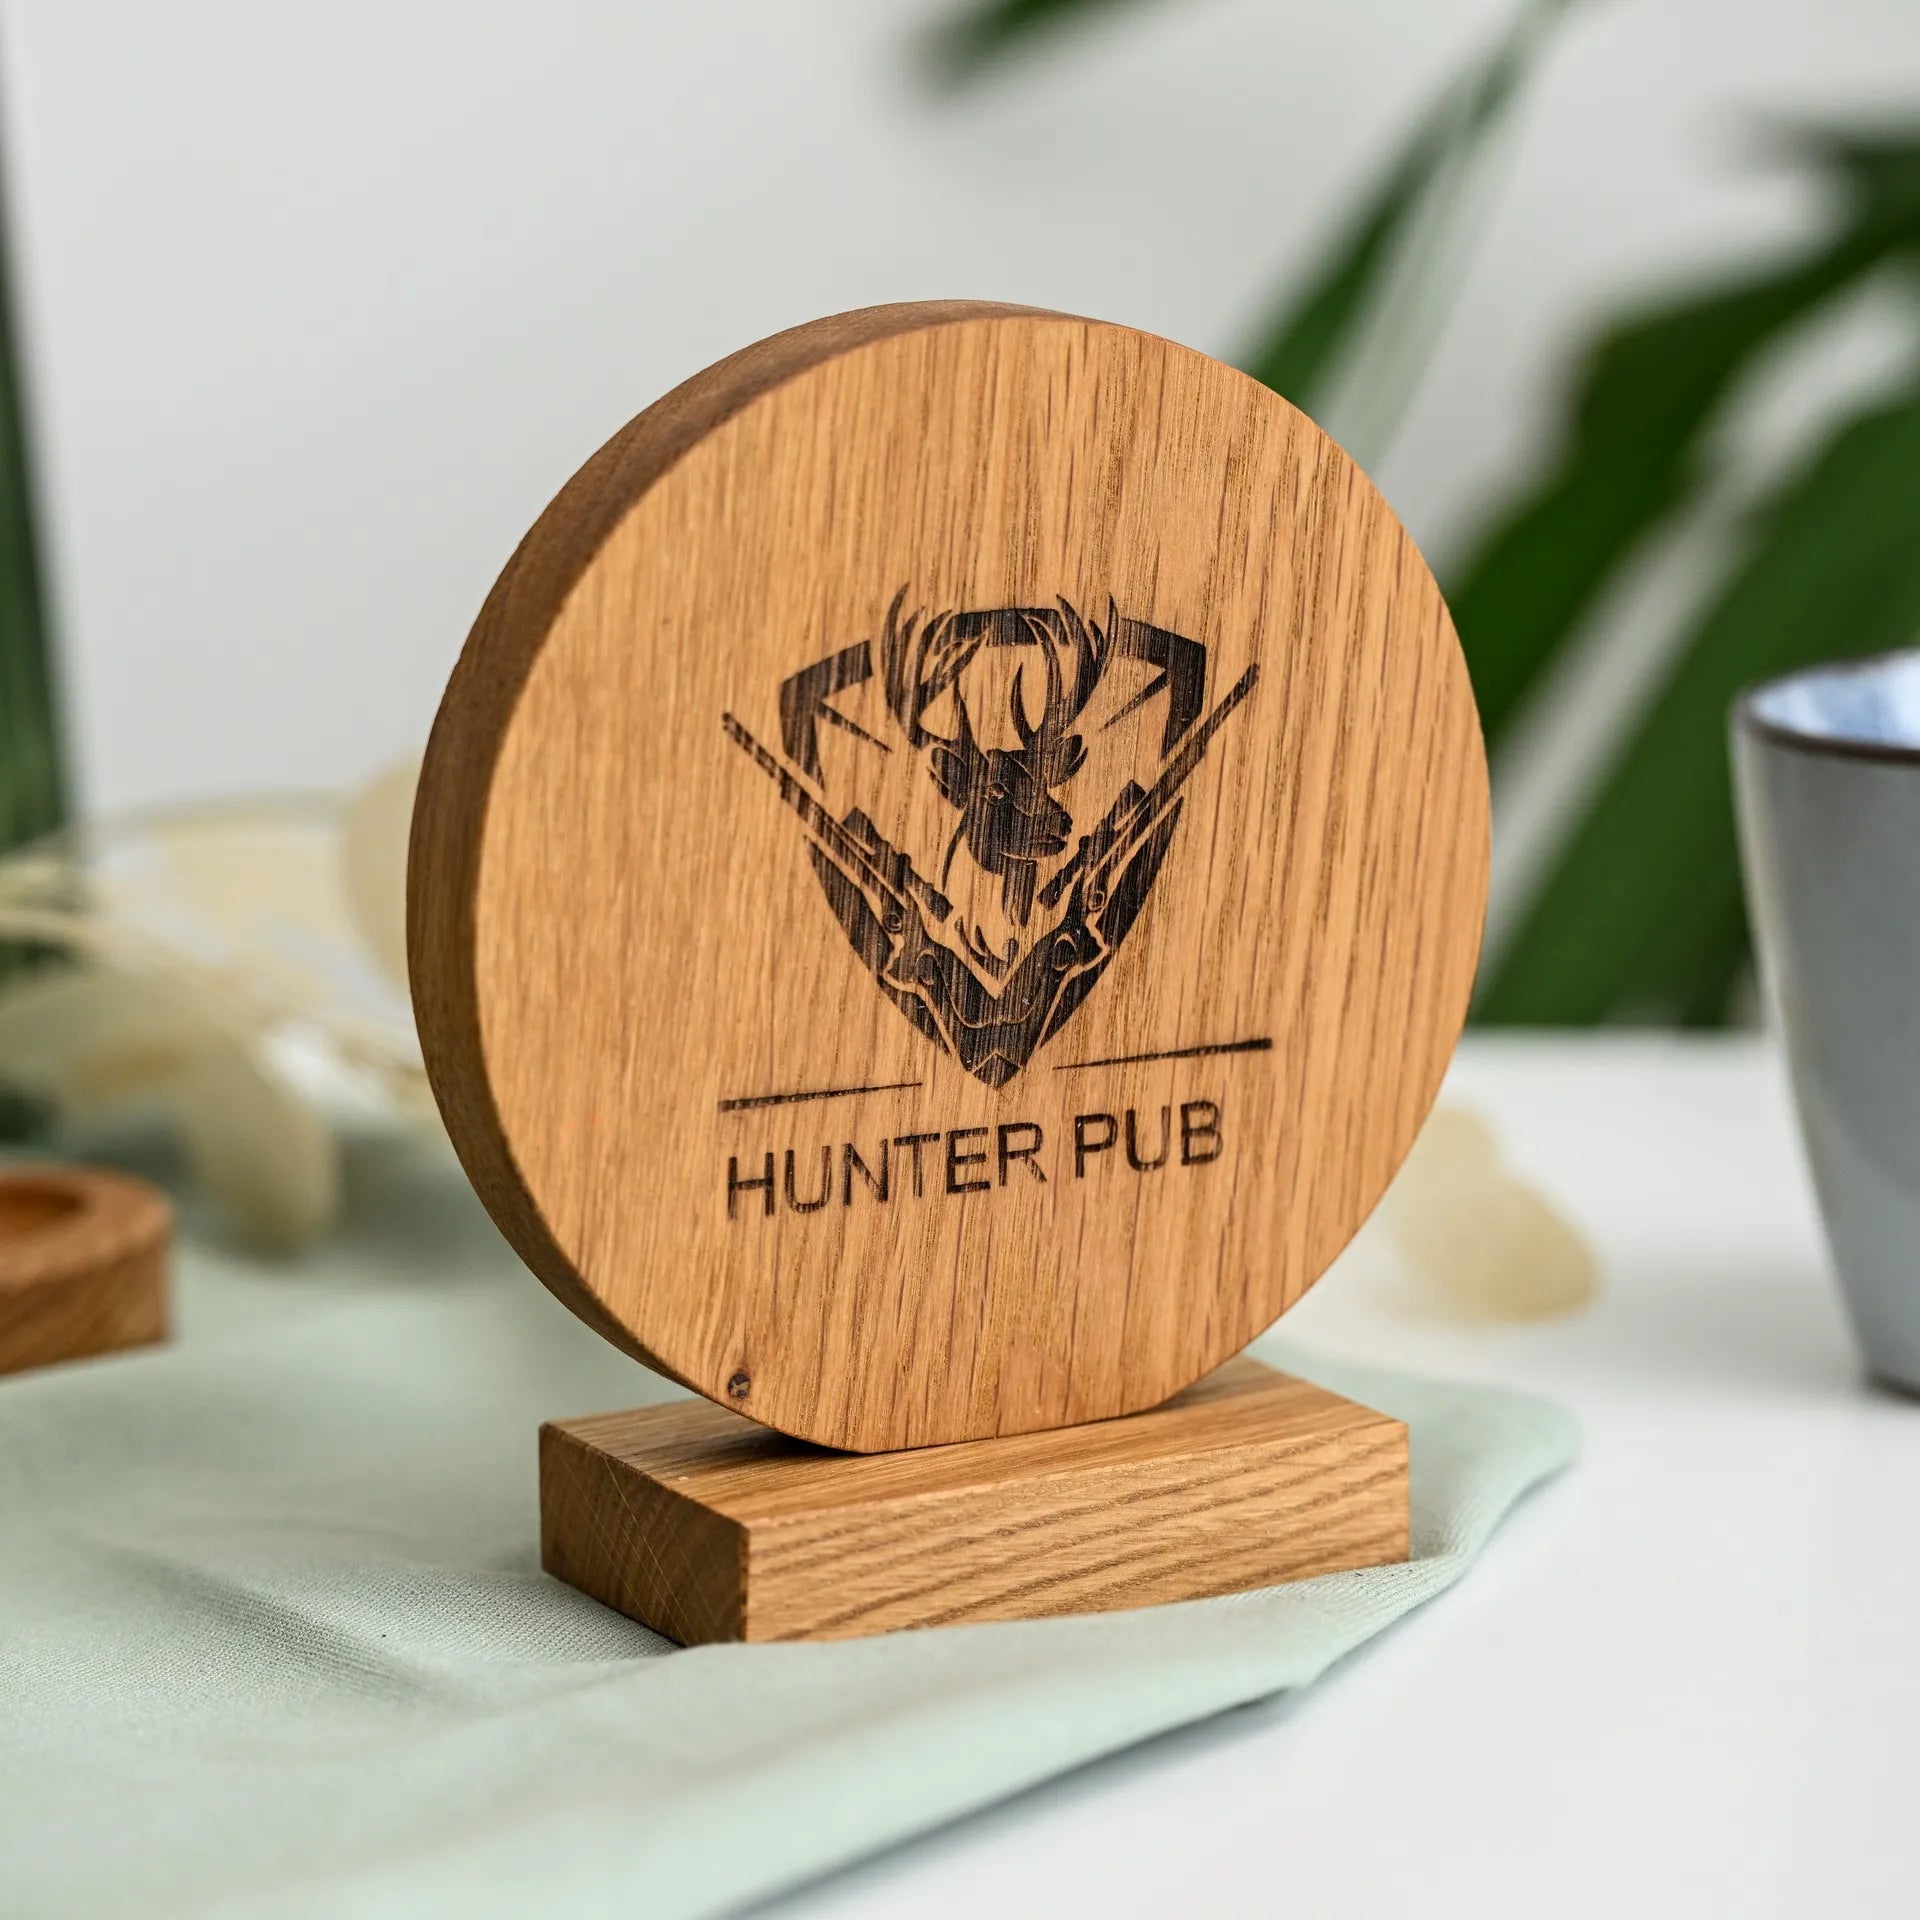 Transform your customer experience with our customized NFC tag sign displayed on an elegant oaken stand, offering seamless connectivity and interaction.